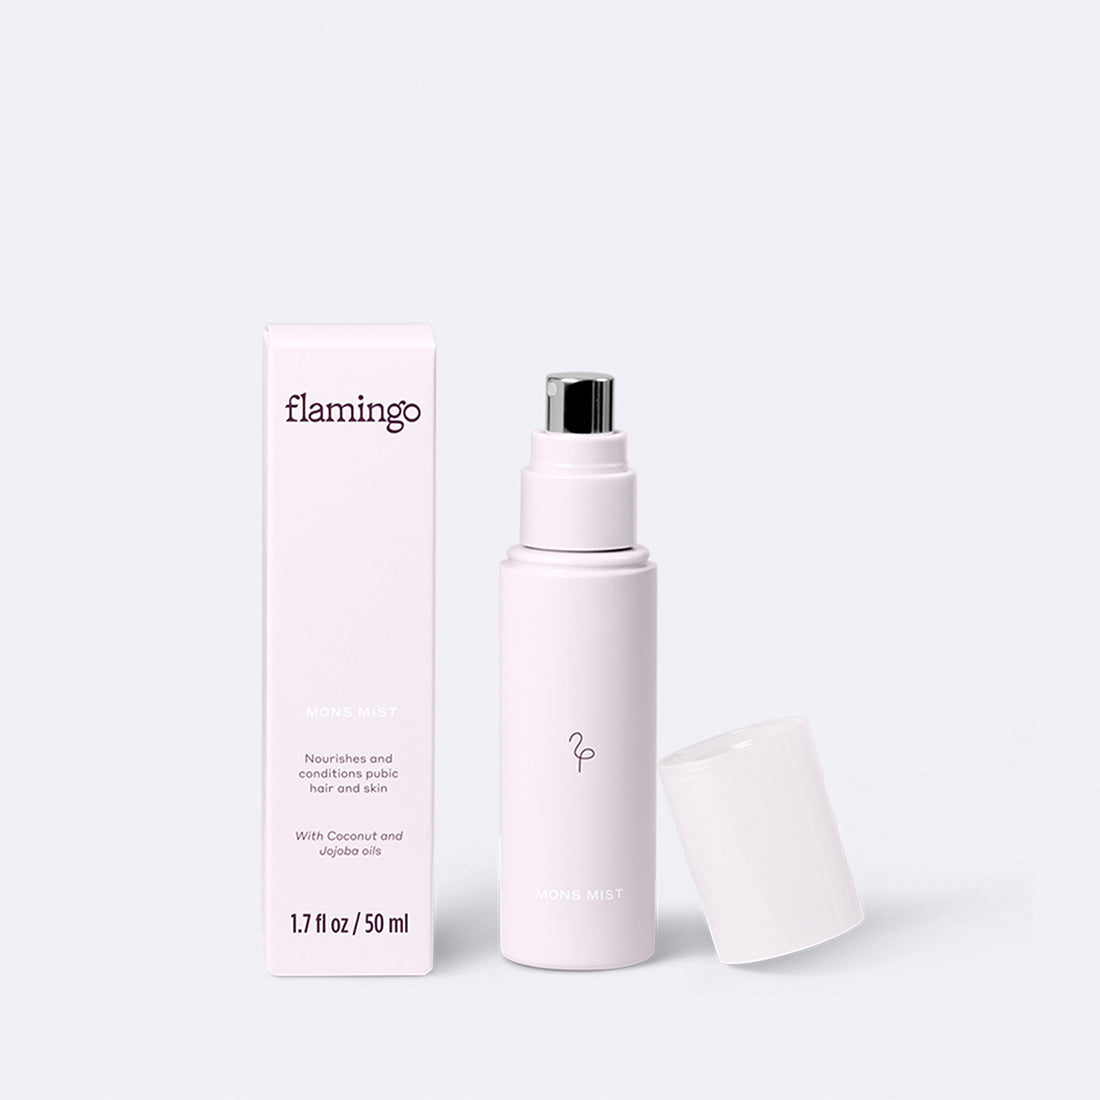 A pale purple bottle of Flamingo Mons Mist with the cap taken off to display the polished chrome spray nozzle